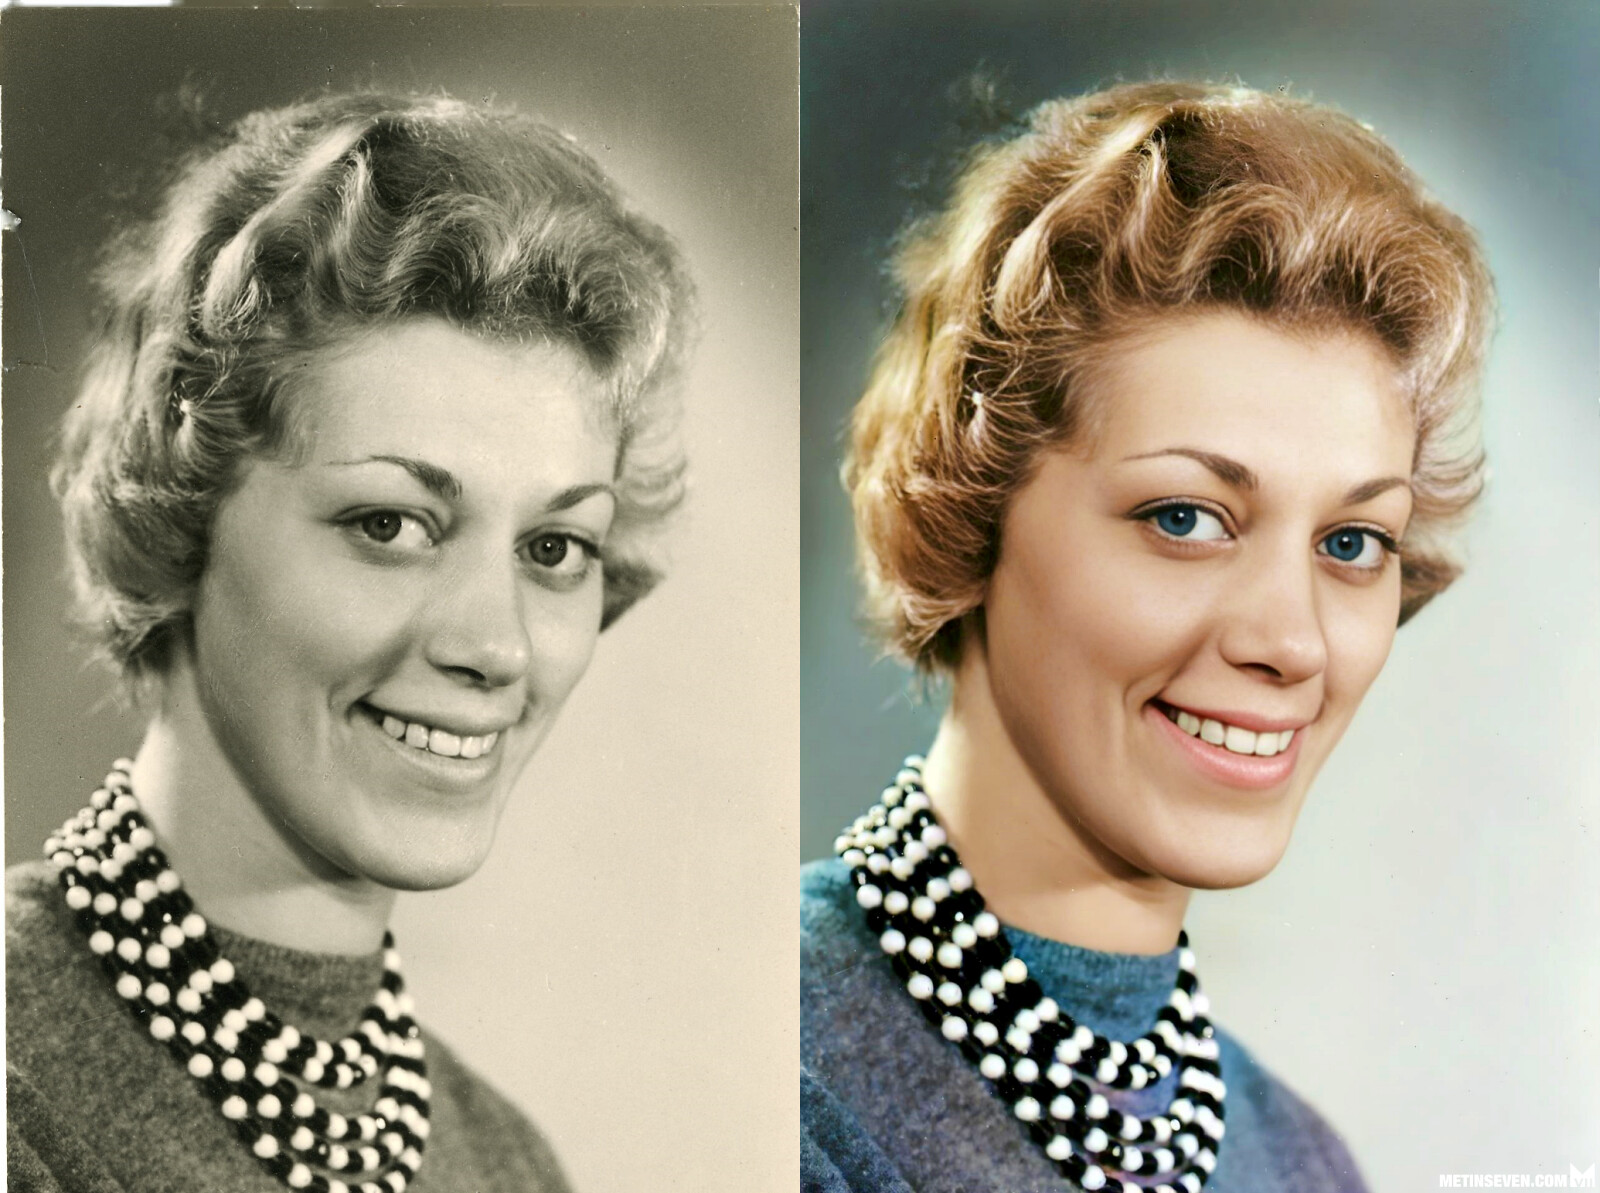 Printed old photographs, touched-up and colorized.